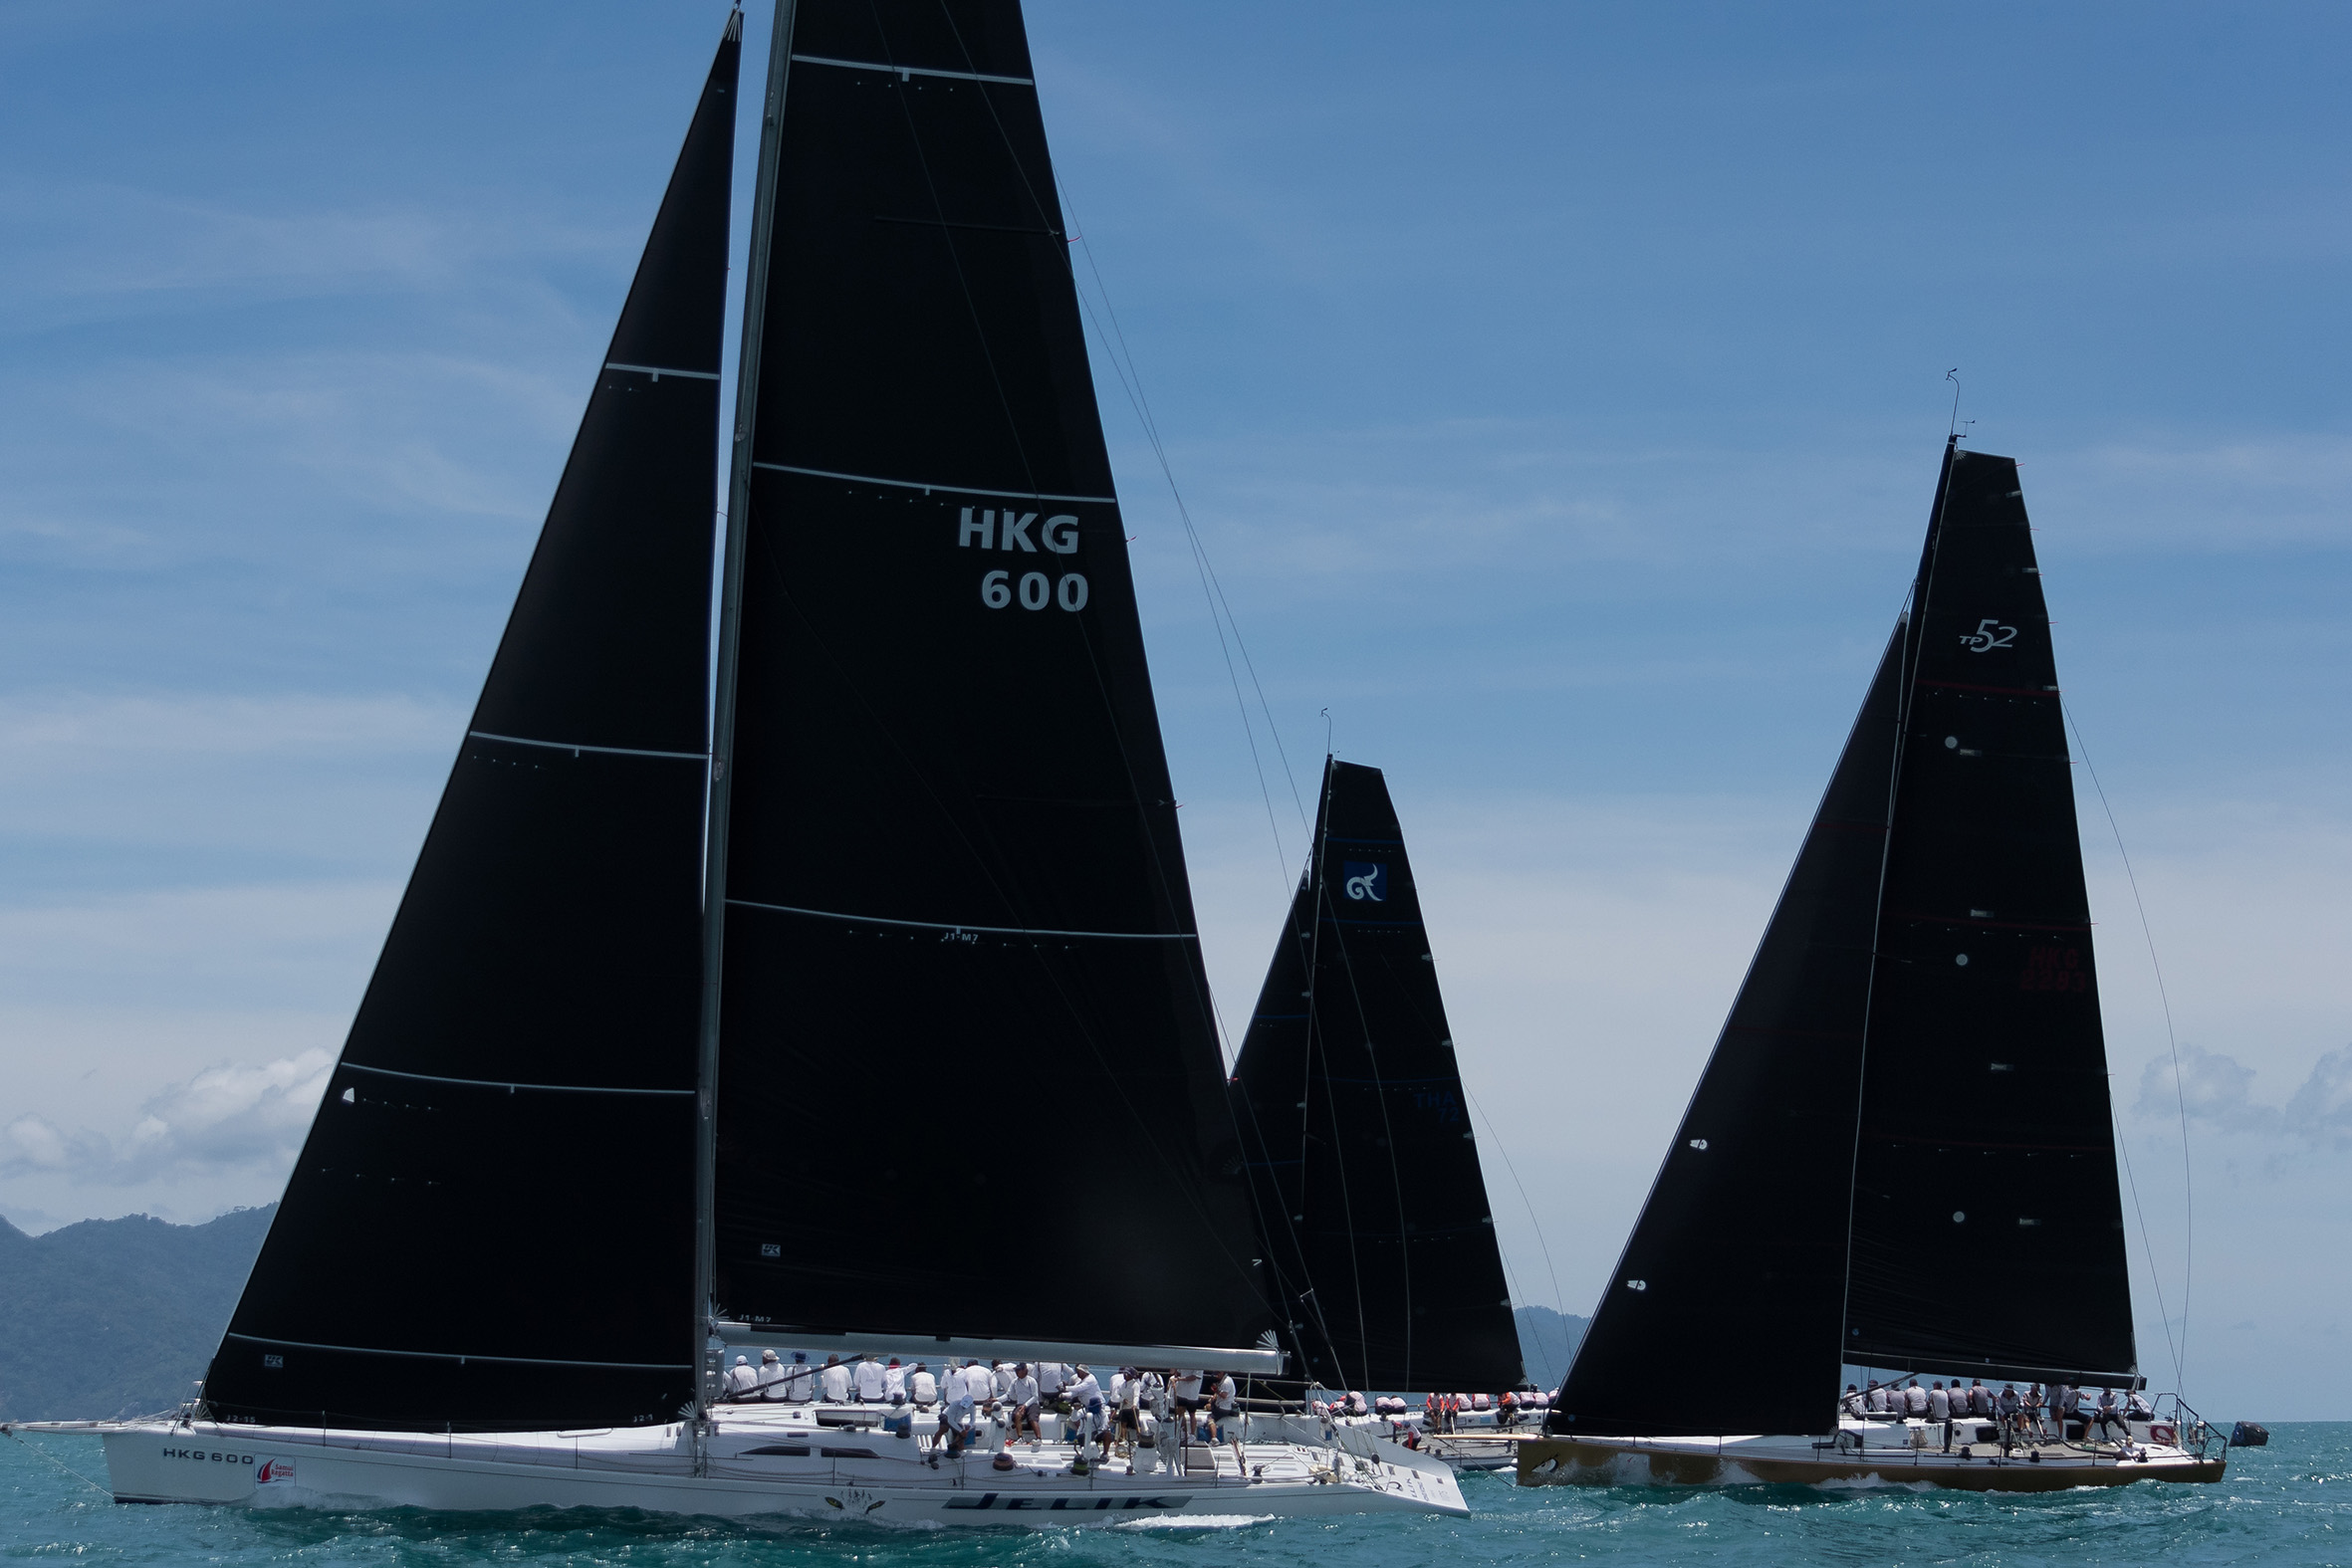 Consolidation at the top on Day 3 of 2017 Samui Regatta